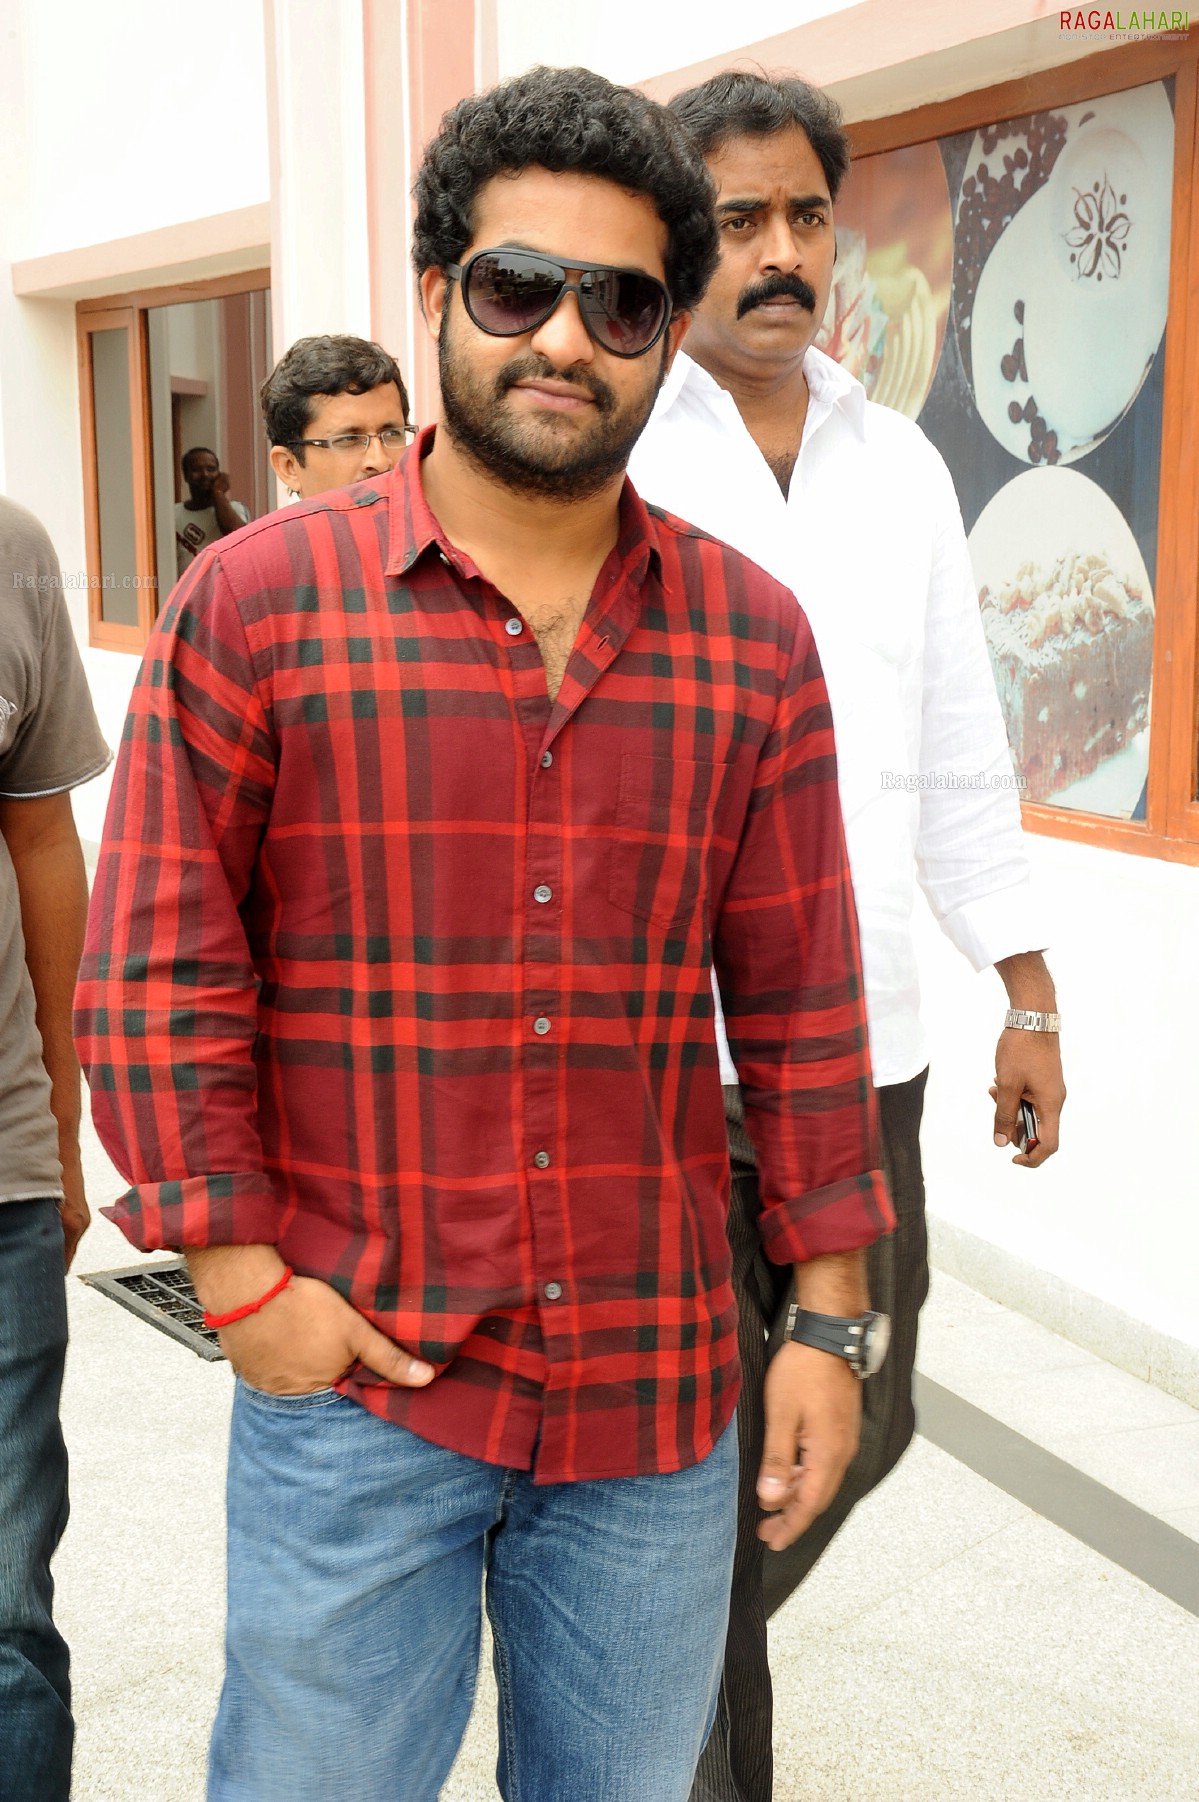 NTR with Beard at Oosaravelli Press Meet, HD Gallery, Images